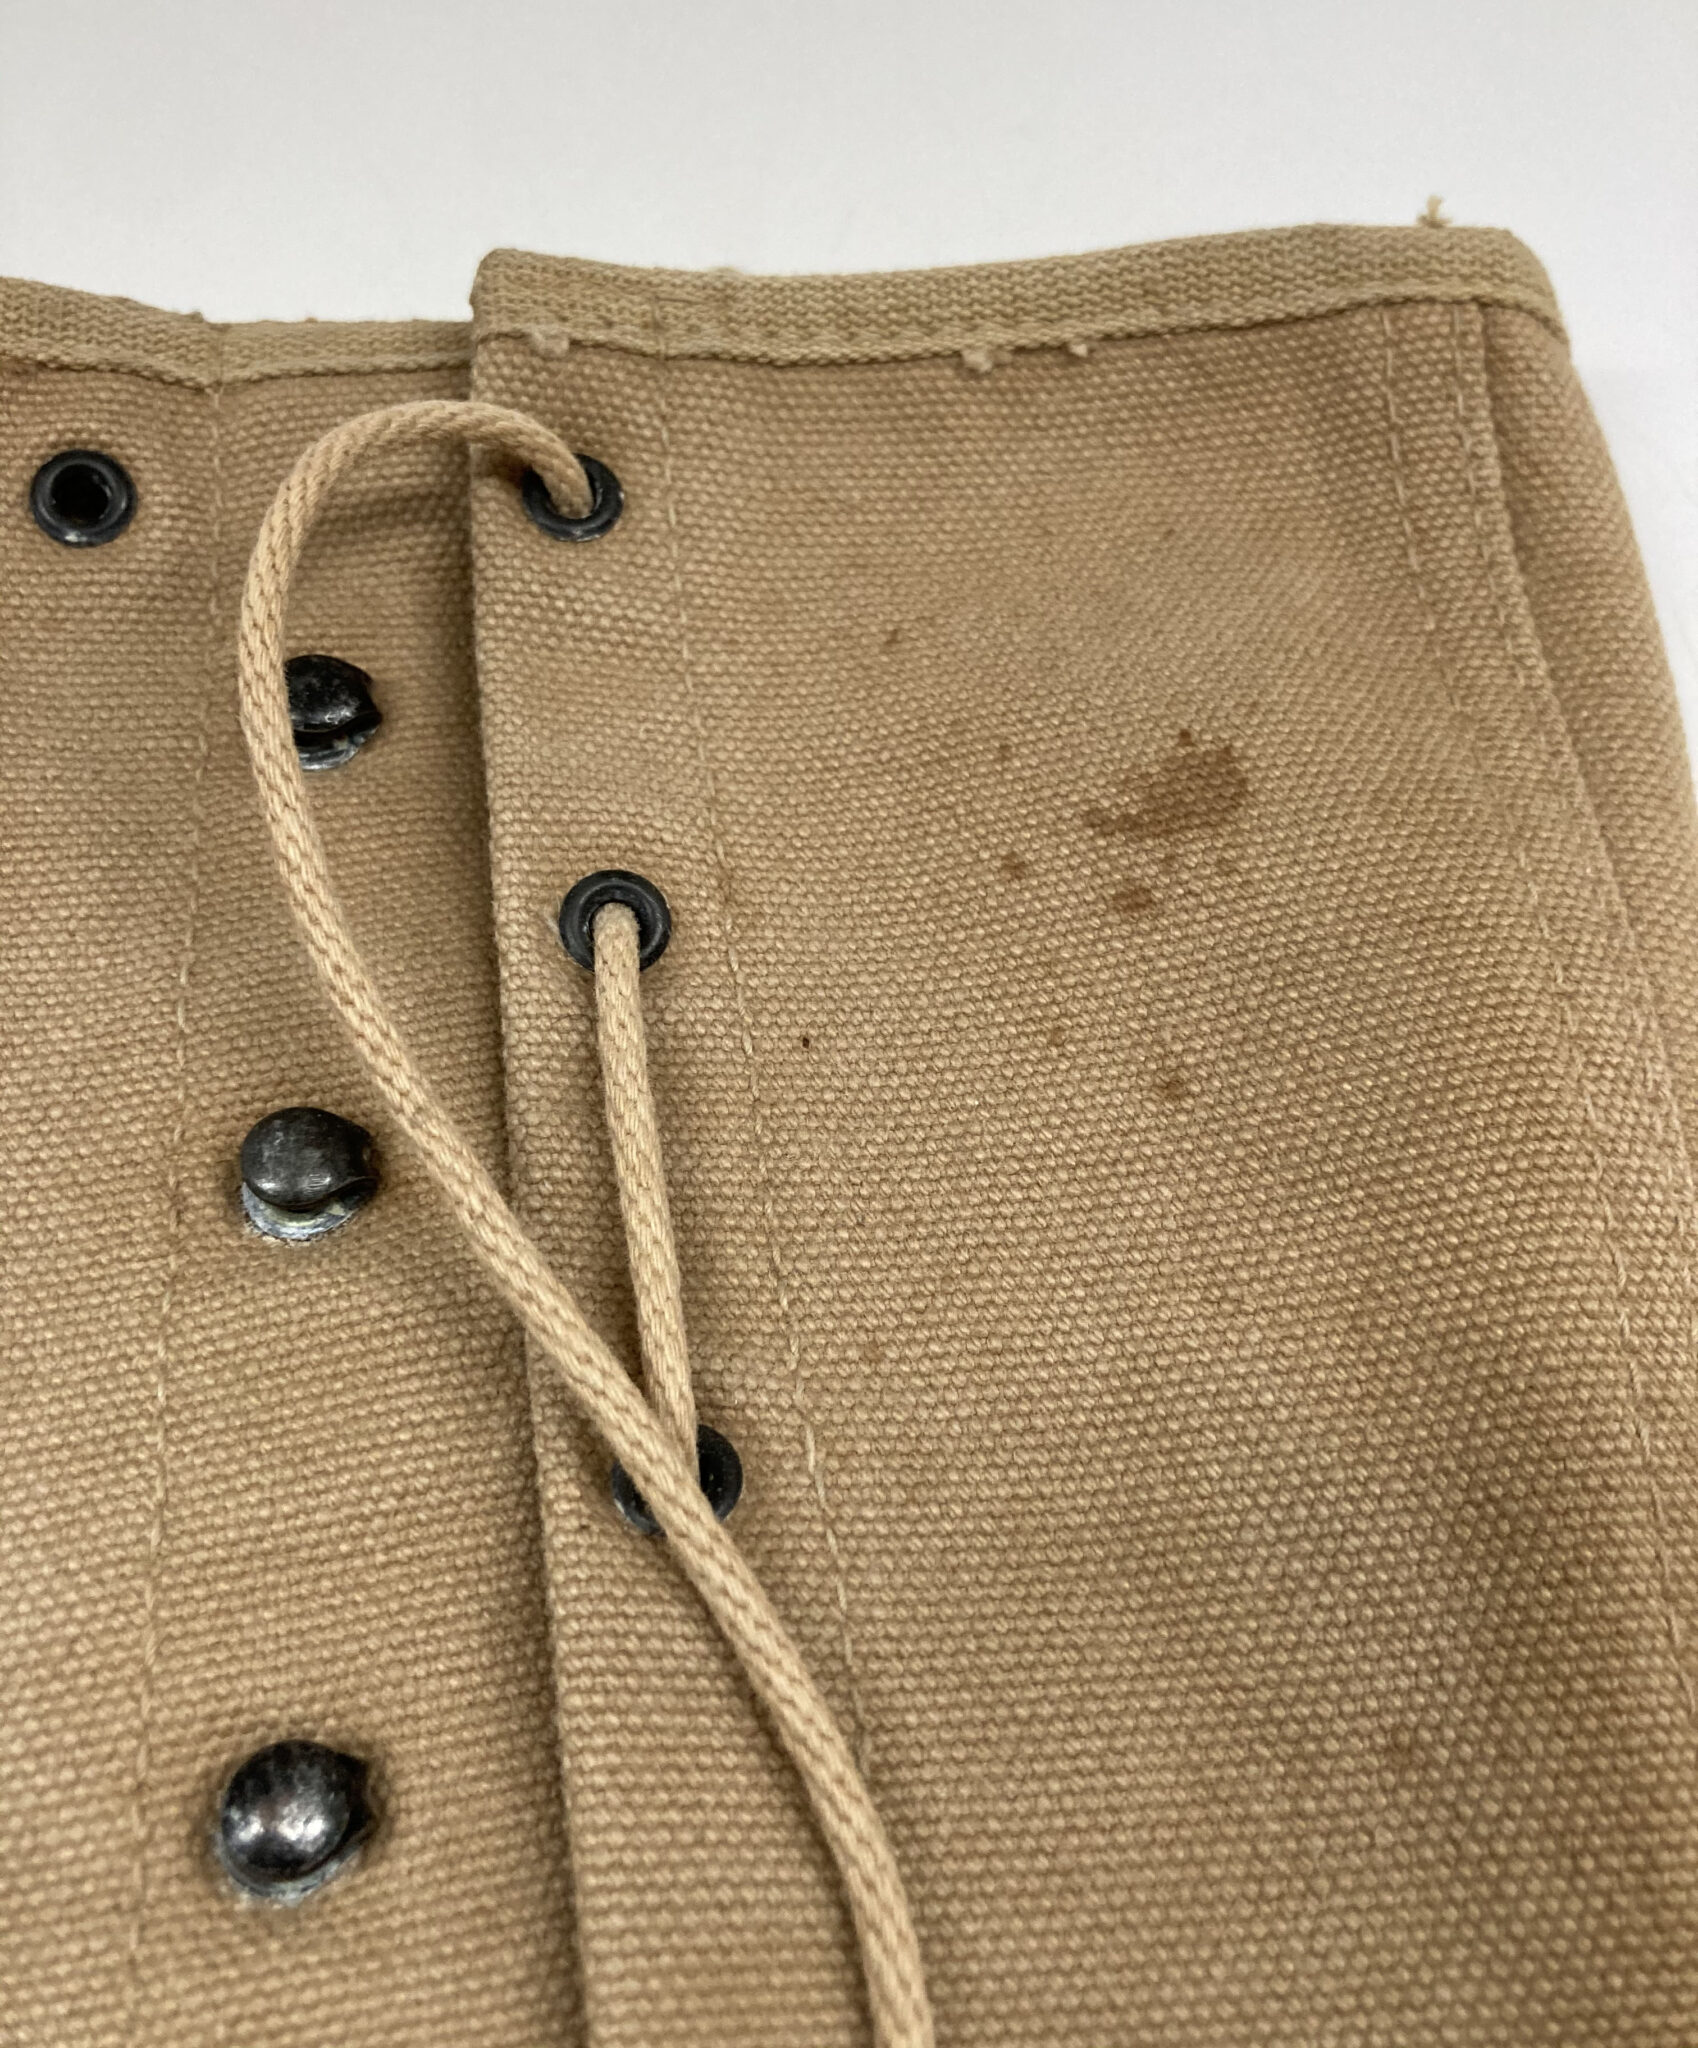 Early Set of U.S. Navy/Marine Corps M1938 Combat Gaiters – Named